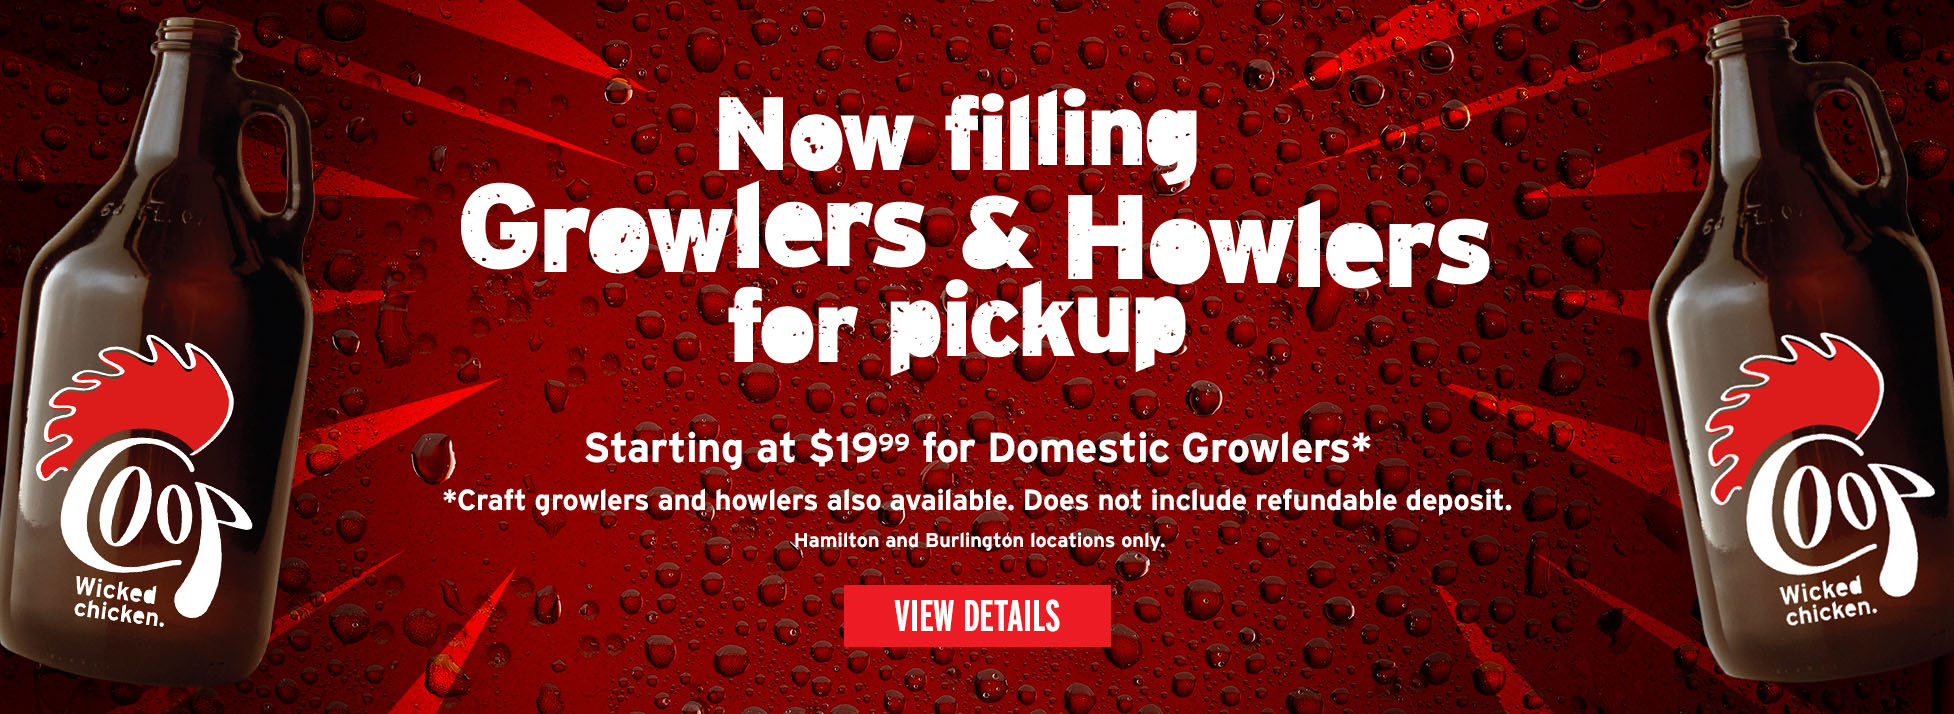 Now filling Growlers and Howlers for pickup. Starting at 19.99* for domestic growlers. * craft growlers and howlers also available. Does not include refundable deposit.